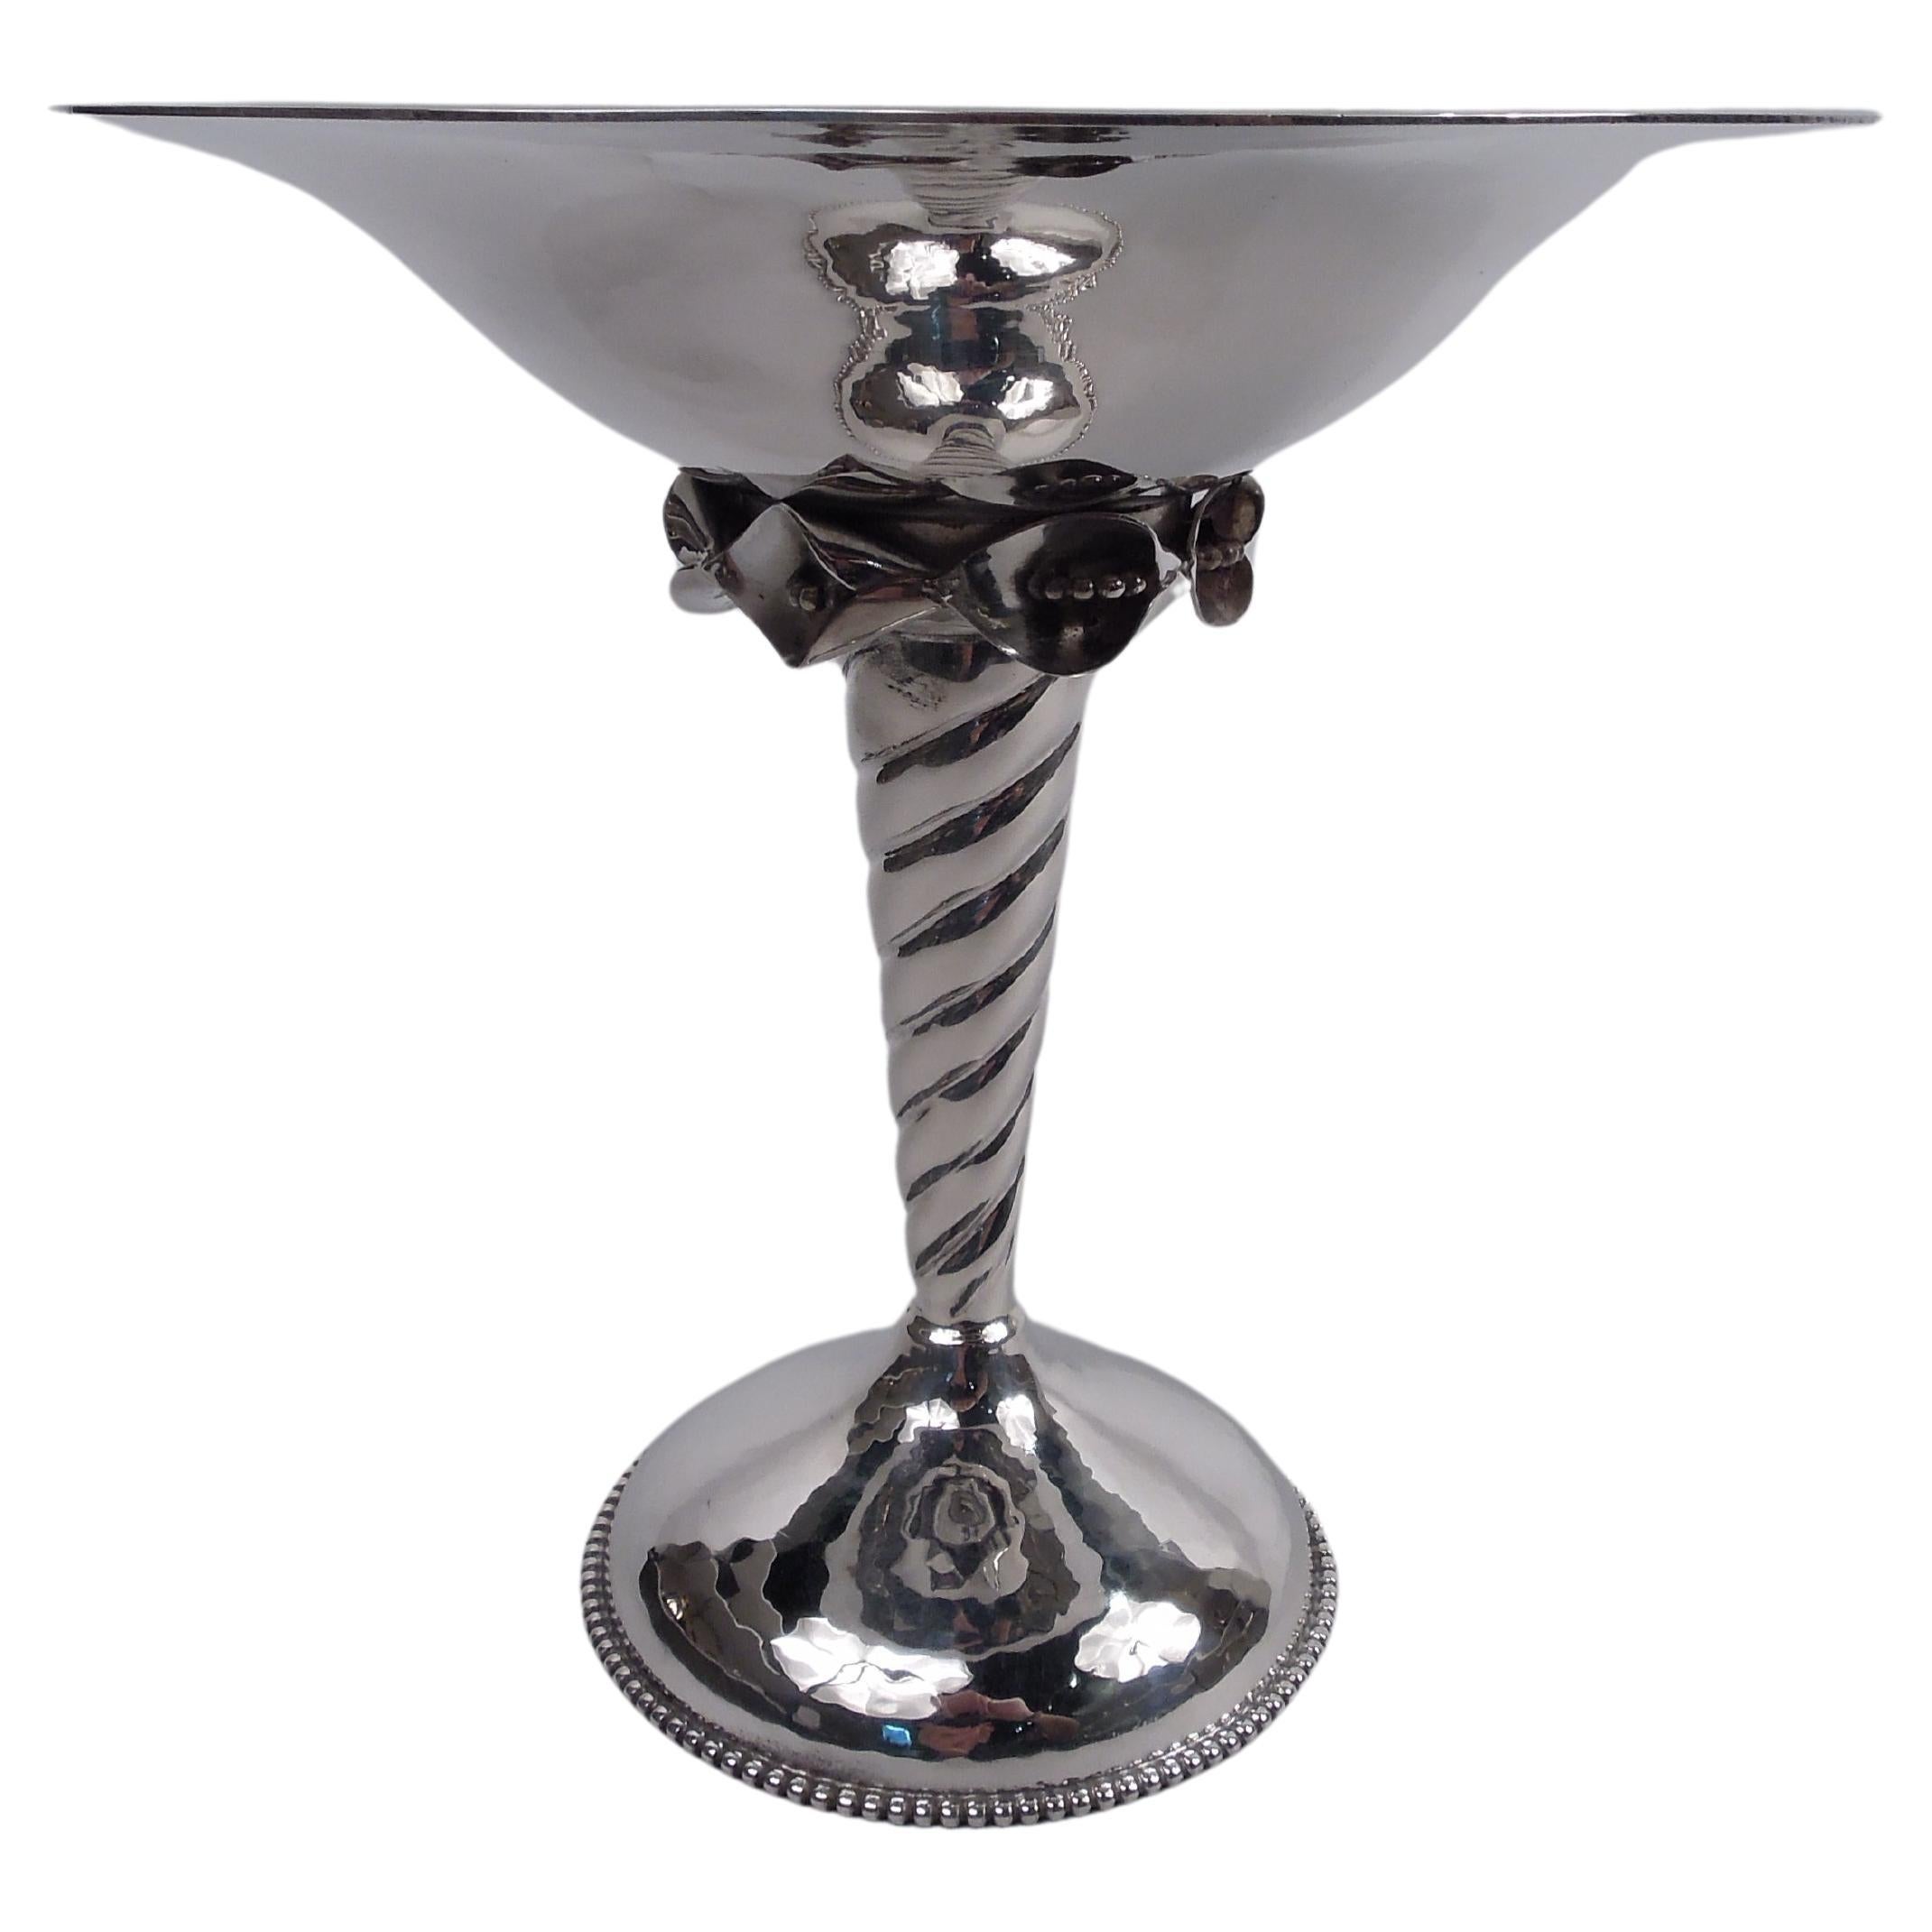 DeMatteo Midcentury Modern Sterling Silver Compote For Sale